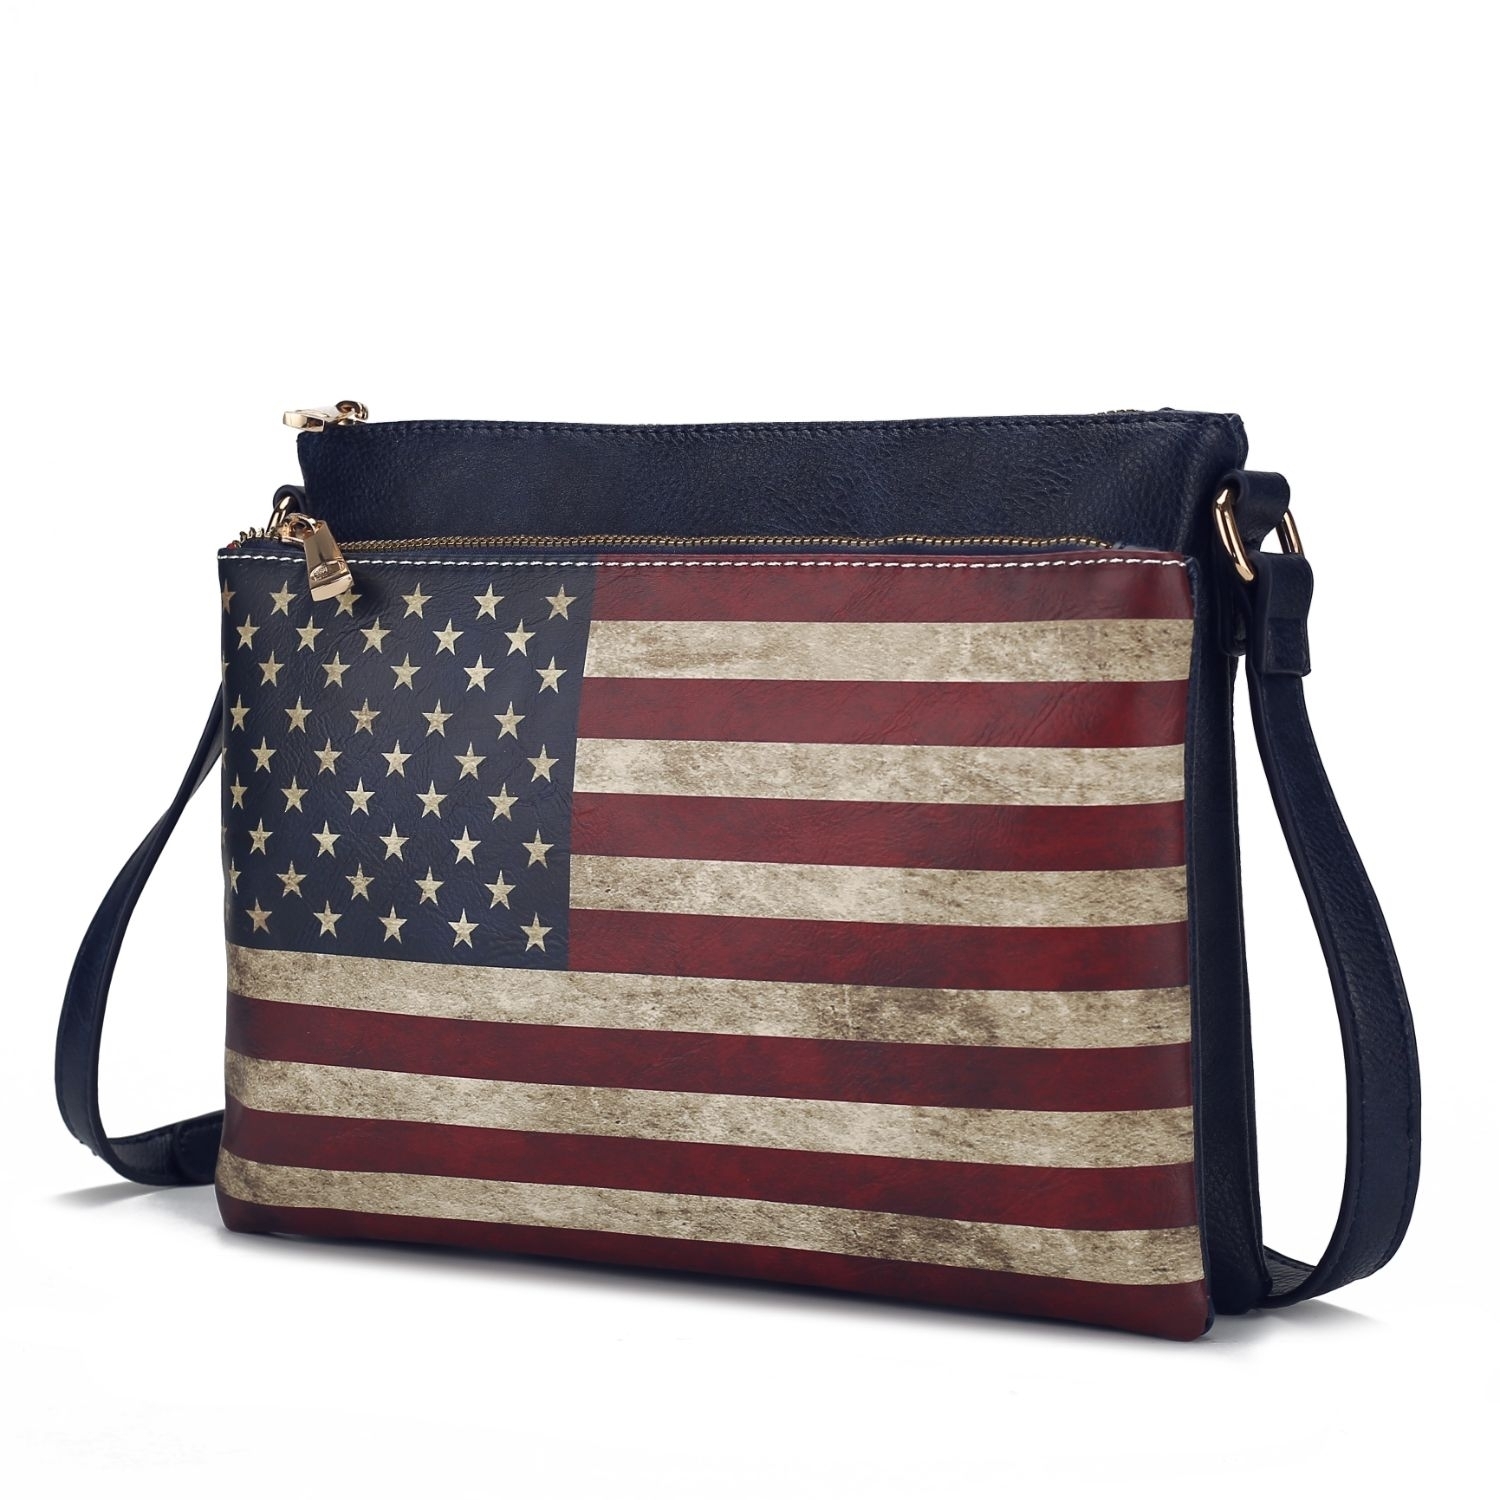 MKF Collection Madeline Printed Flag Vegan Leather Women's Crossbody Bag By Mia K - Navy